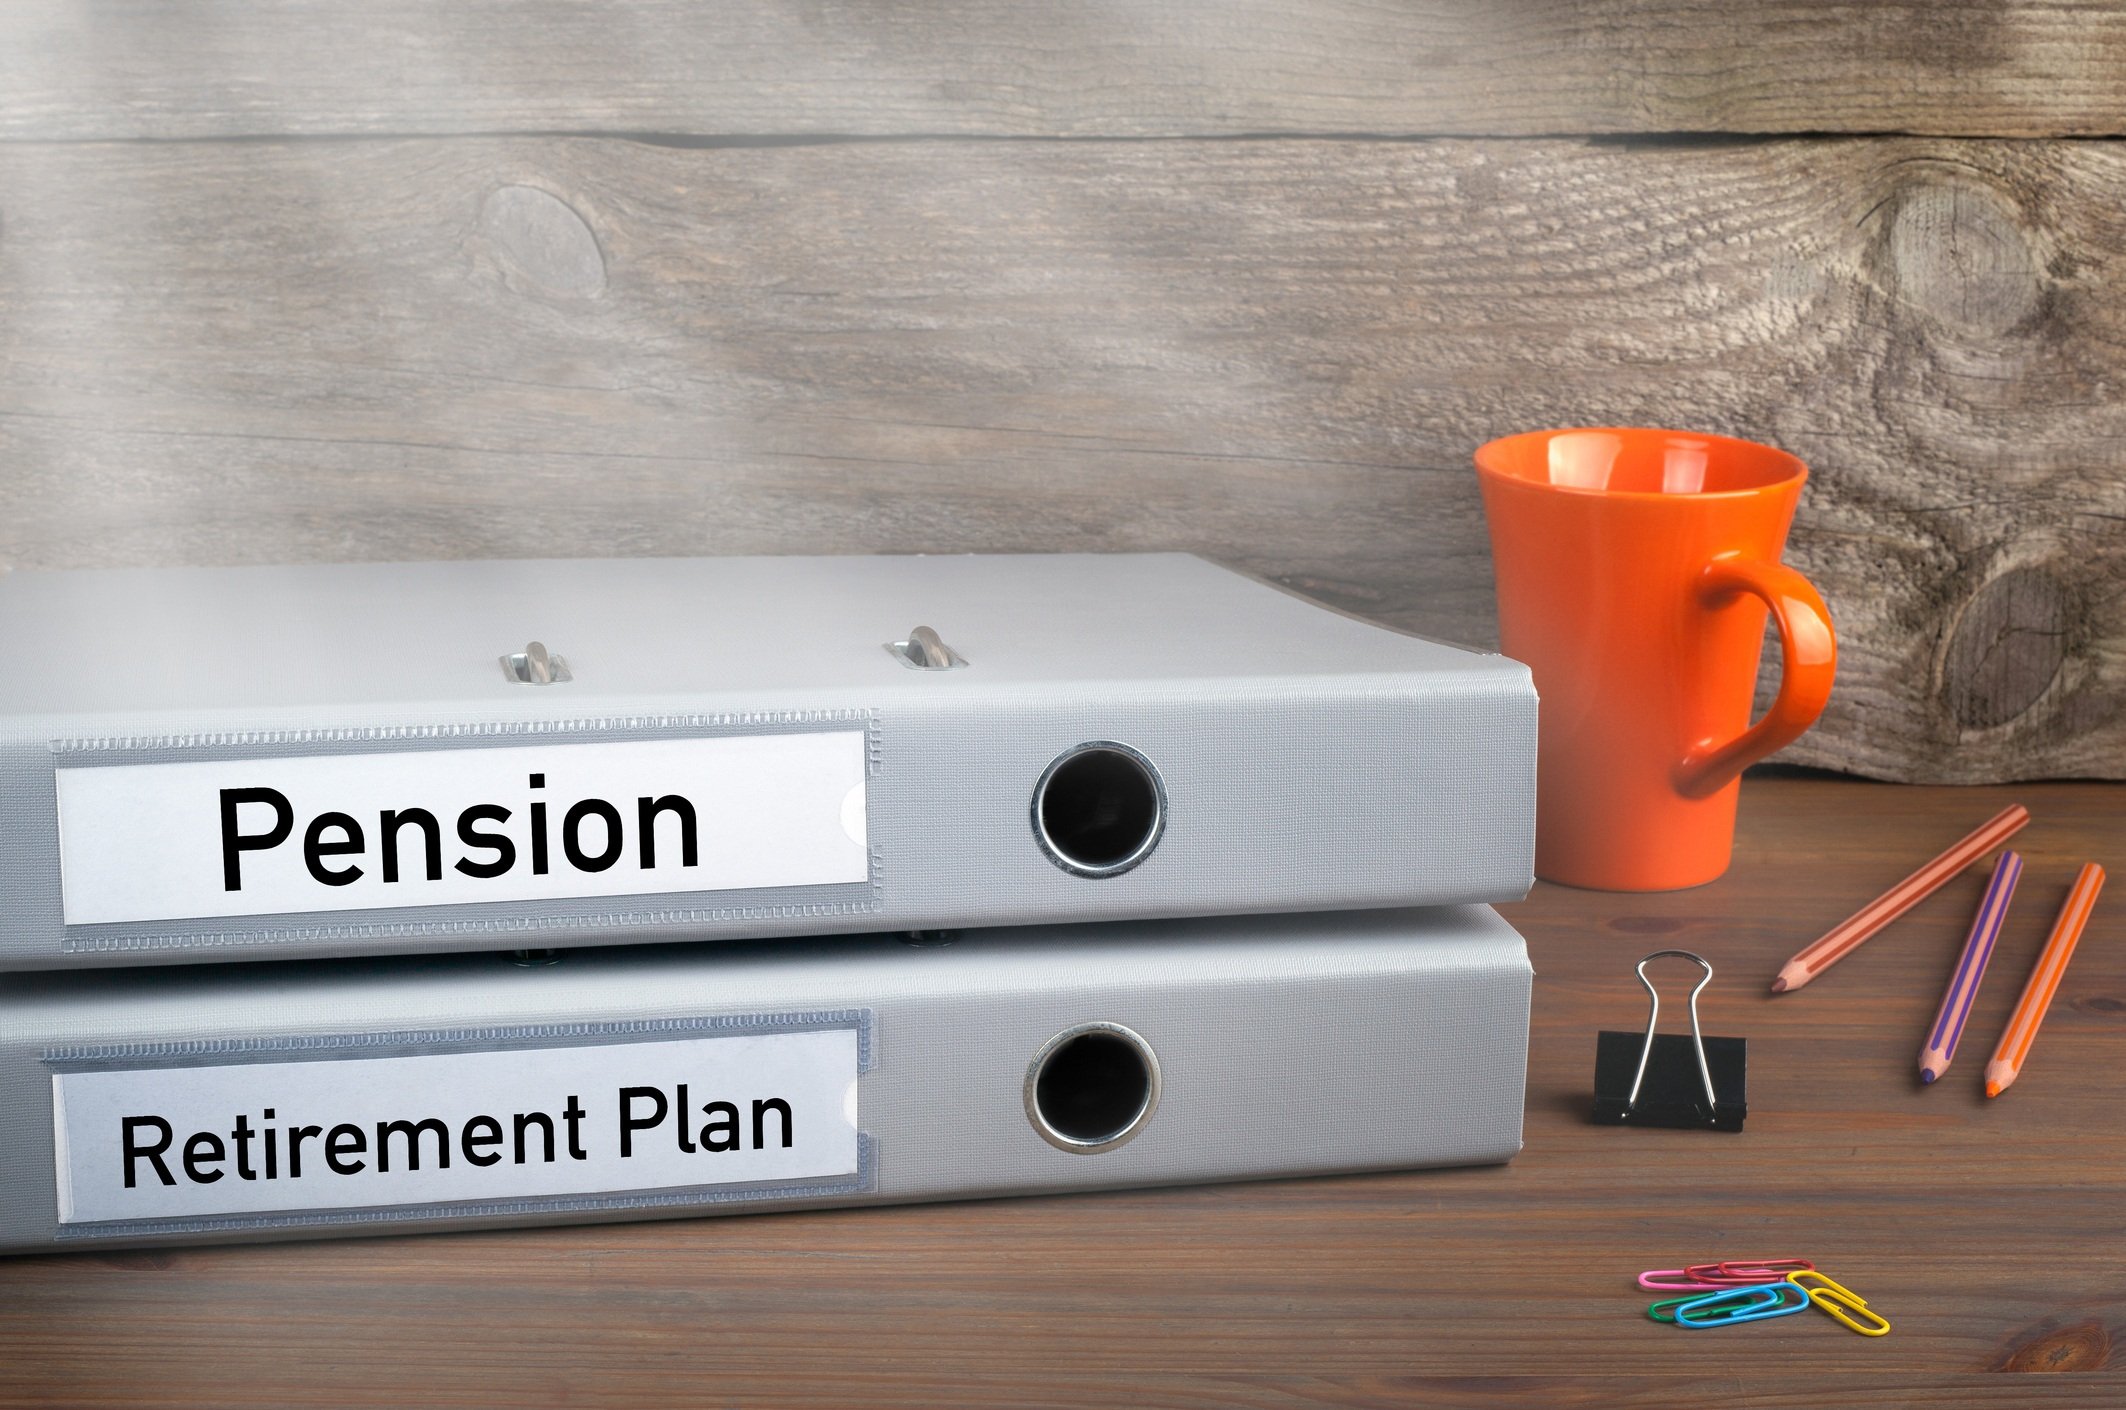 Retirement Plan and Pension